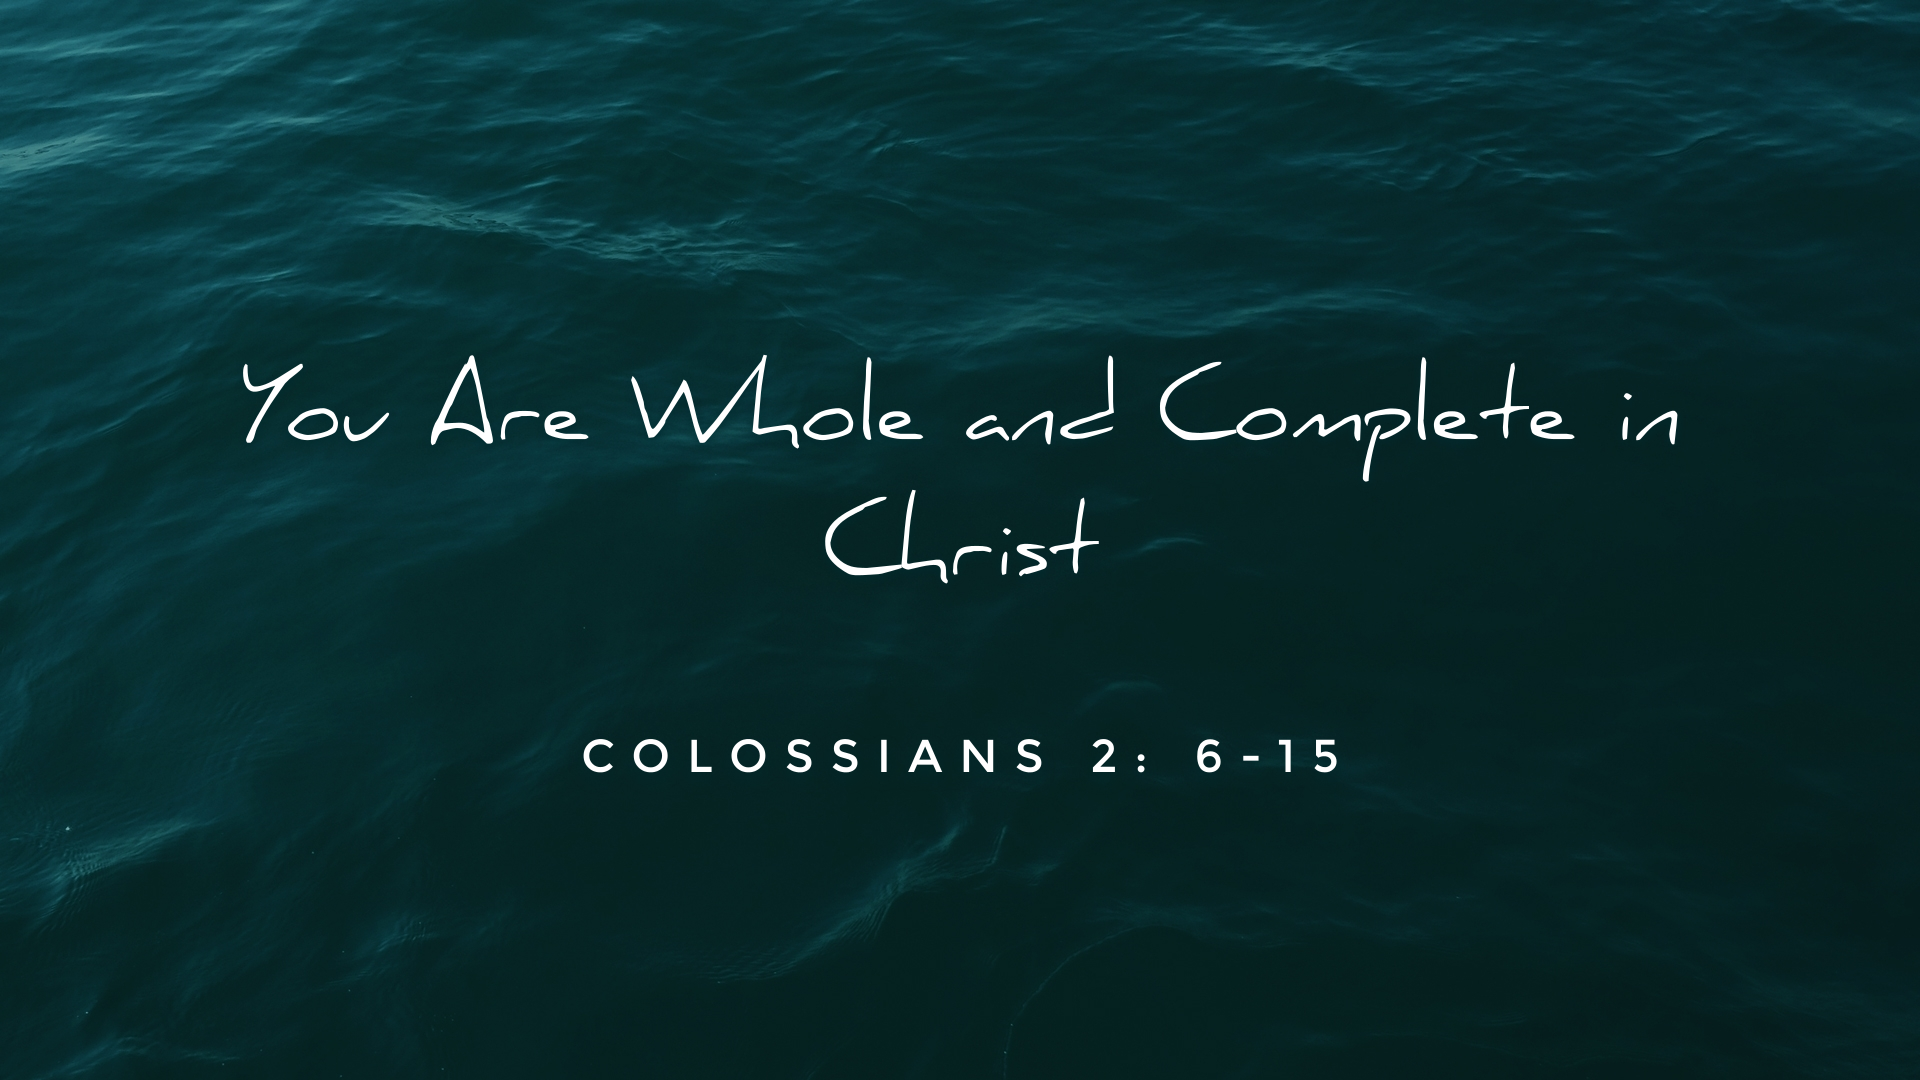 Nov 13, 2022 - You Are Whole and Complete in Christ (Video) - Colossians 2: 6-15